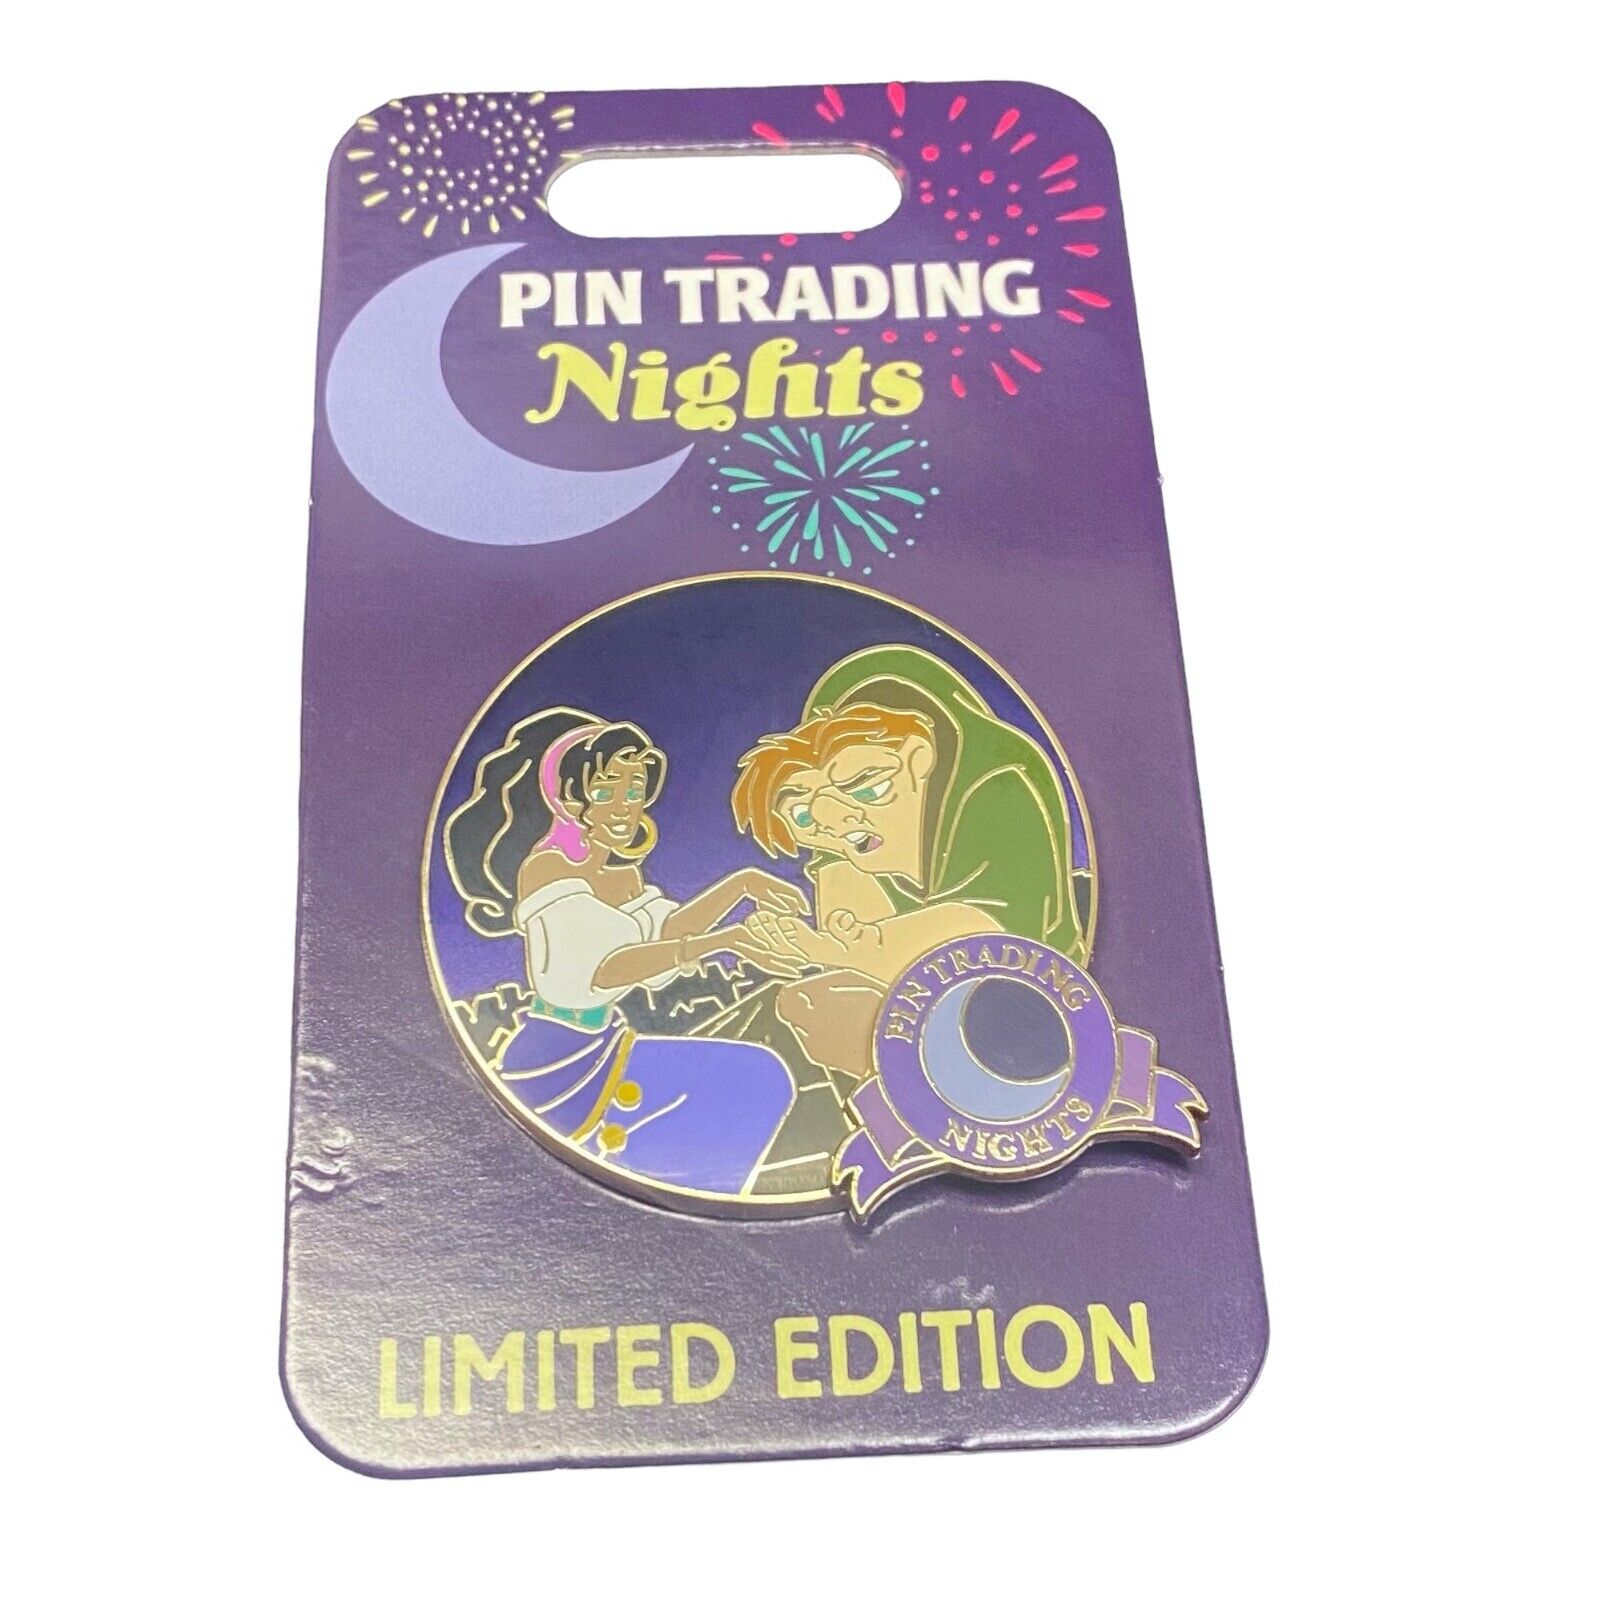 2019 Disney Parks Pin Trading Nights Hunchback of Notre Dame Pin LE